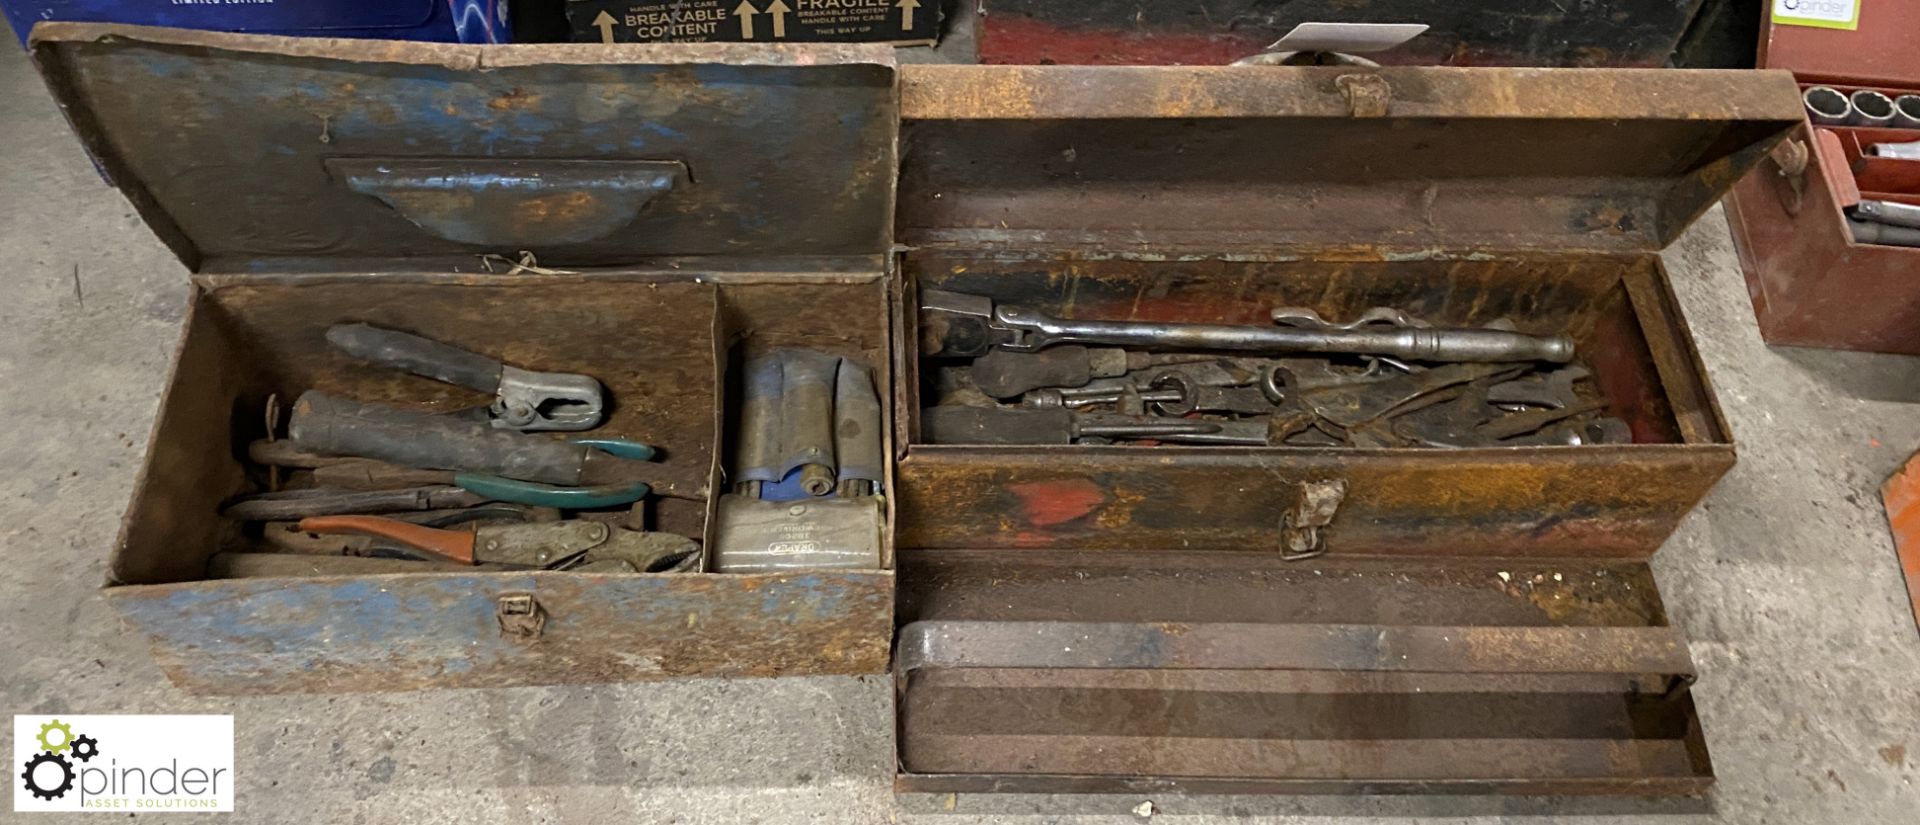 2 steel Tool Boxes and Contents, including socket wrenches, mole grips, spanners